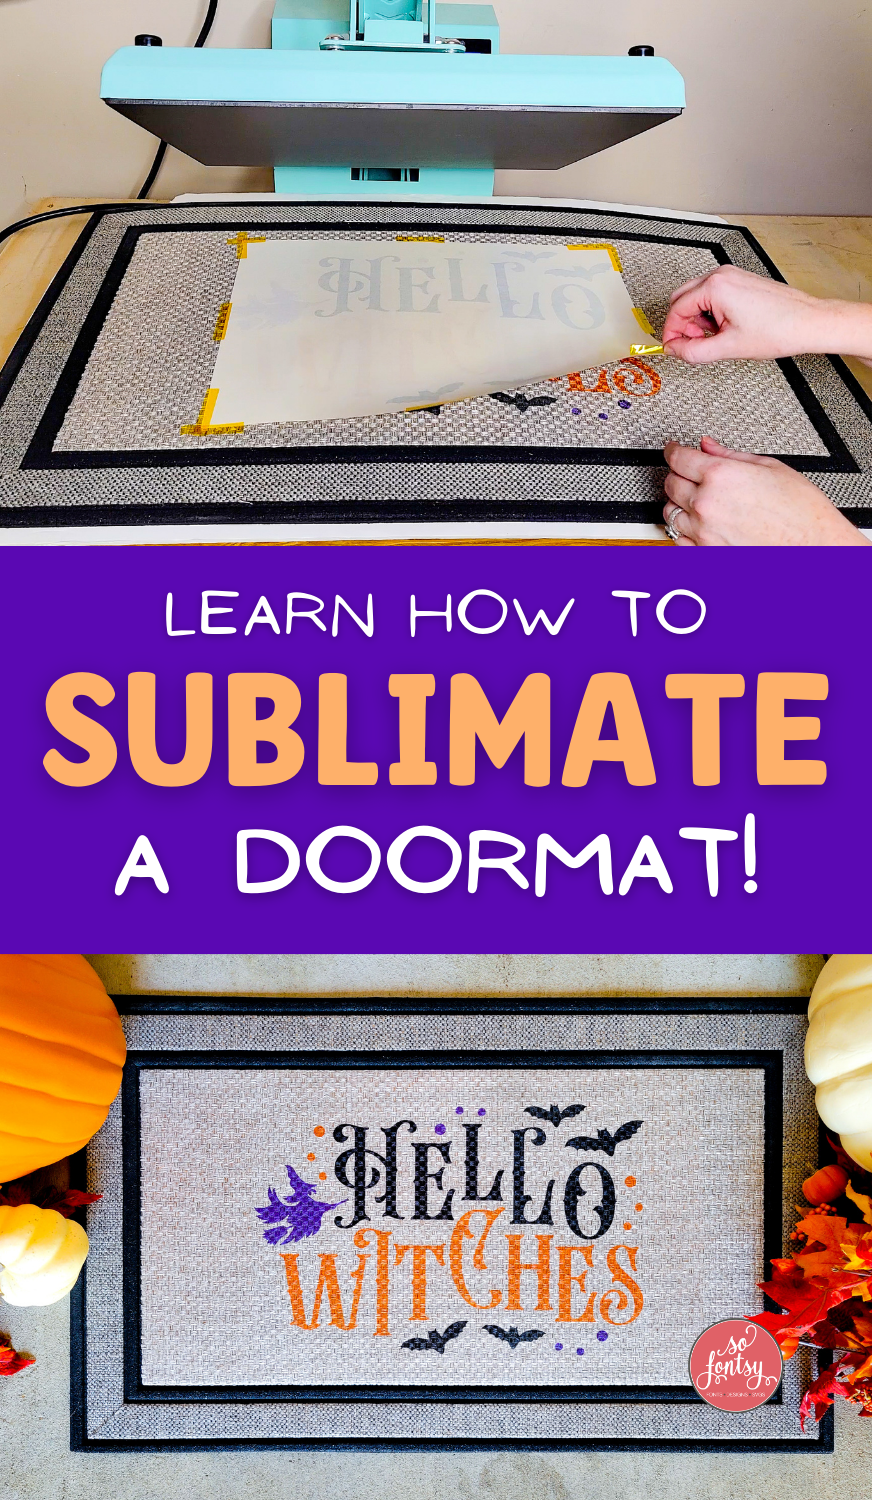 Learn How to Sublimate a Doormat